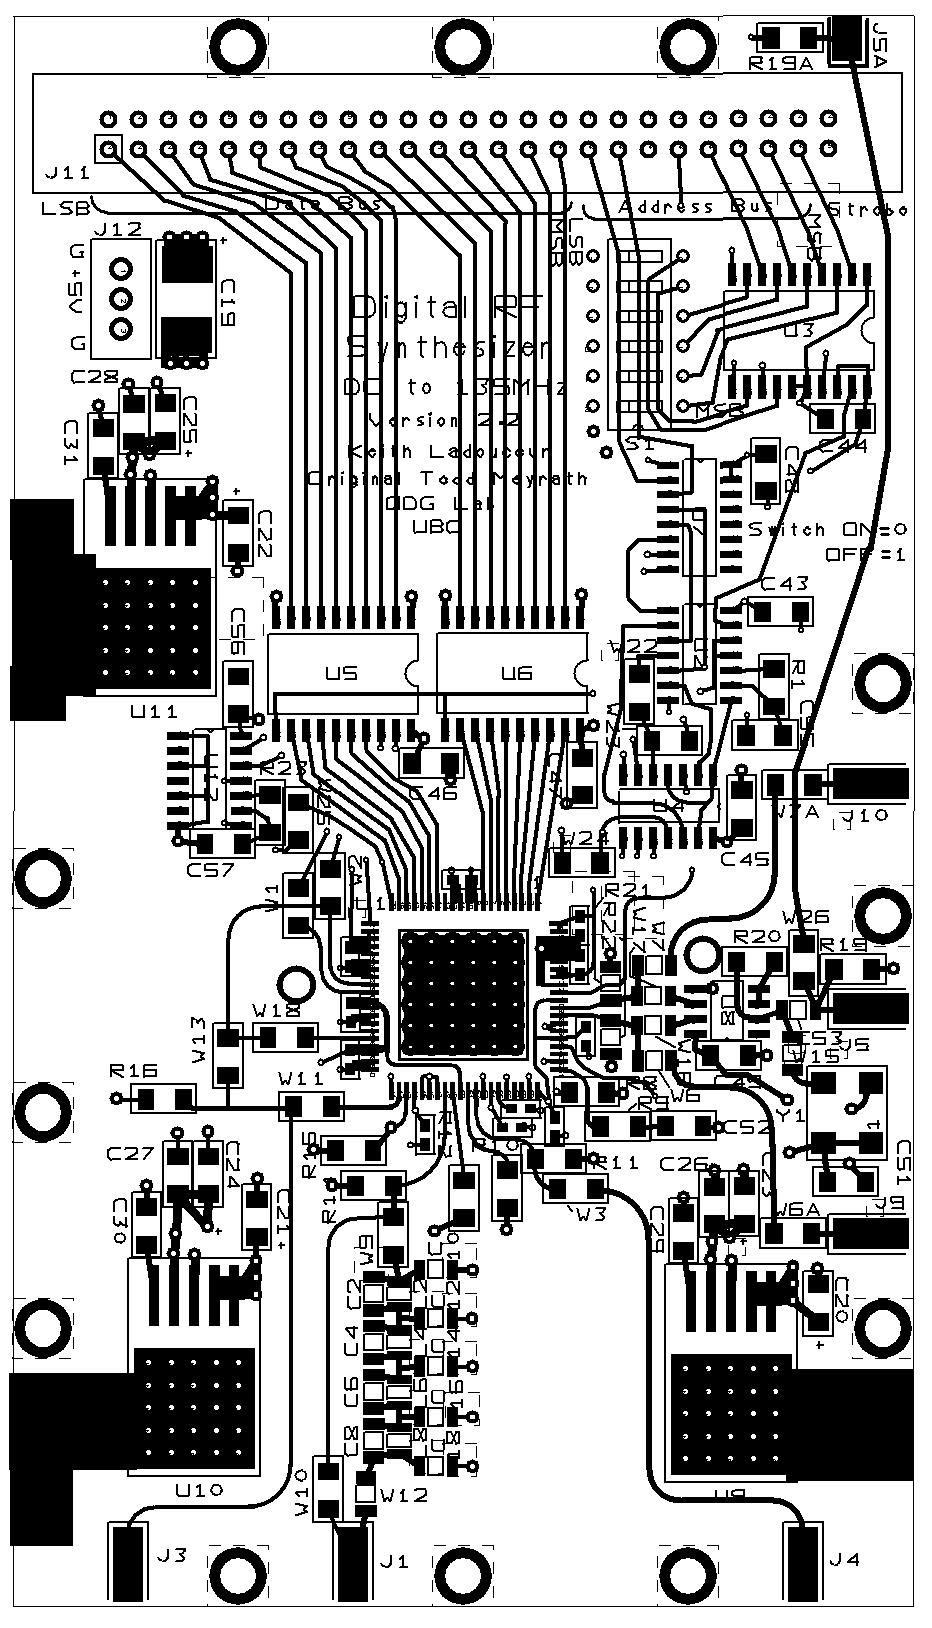 Chapter 6. Control System Hardware Figure 6.7: Top level PCB layout of the modified DDS device.